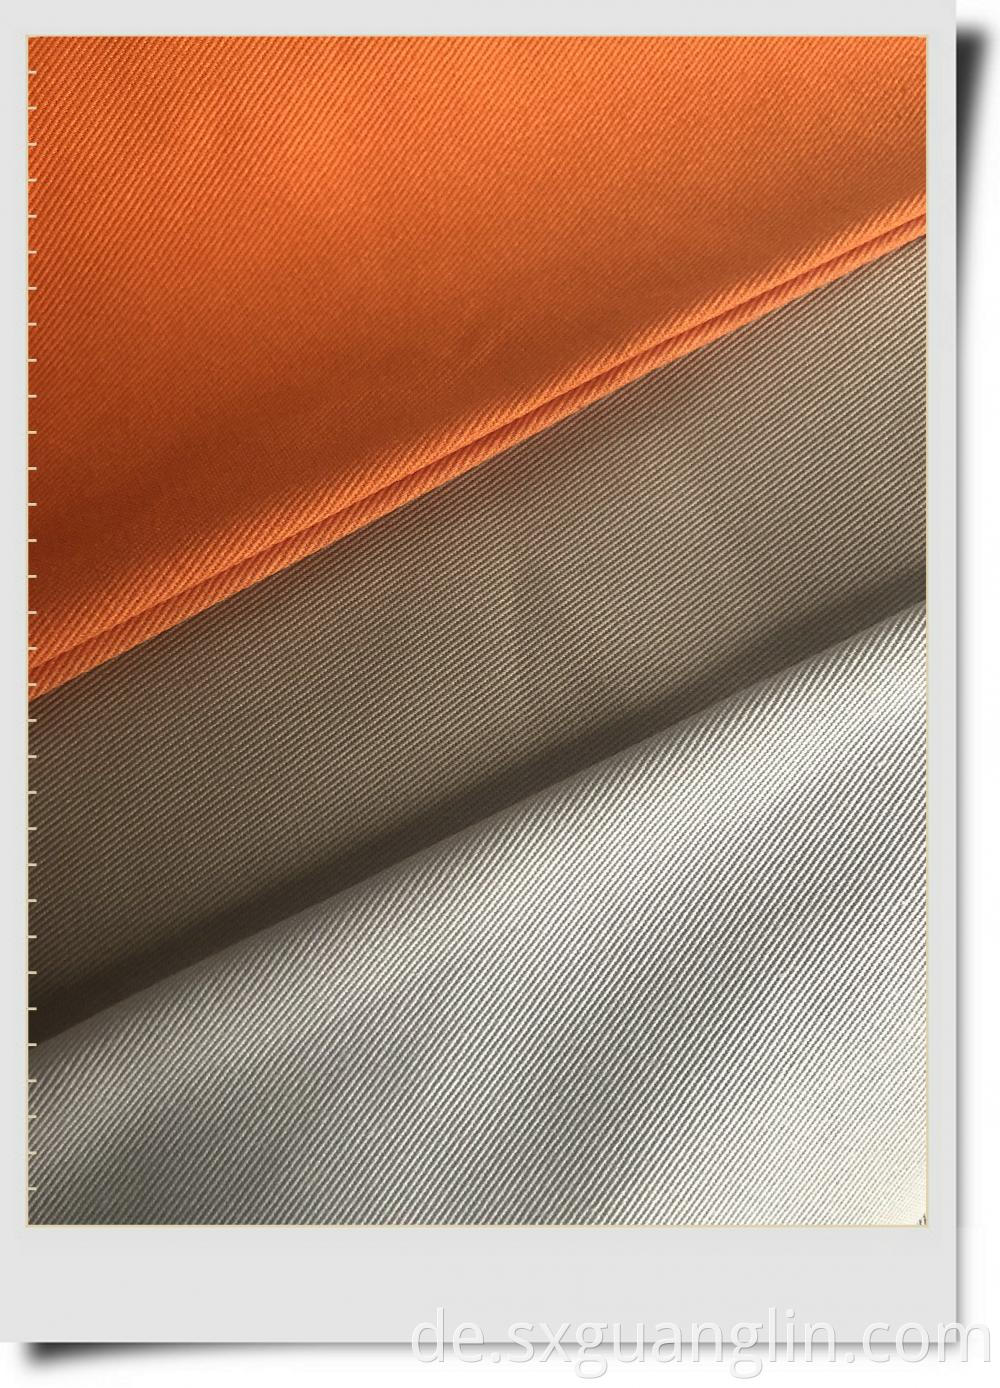 polyester cotton twill fabric